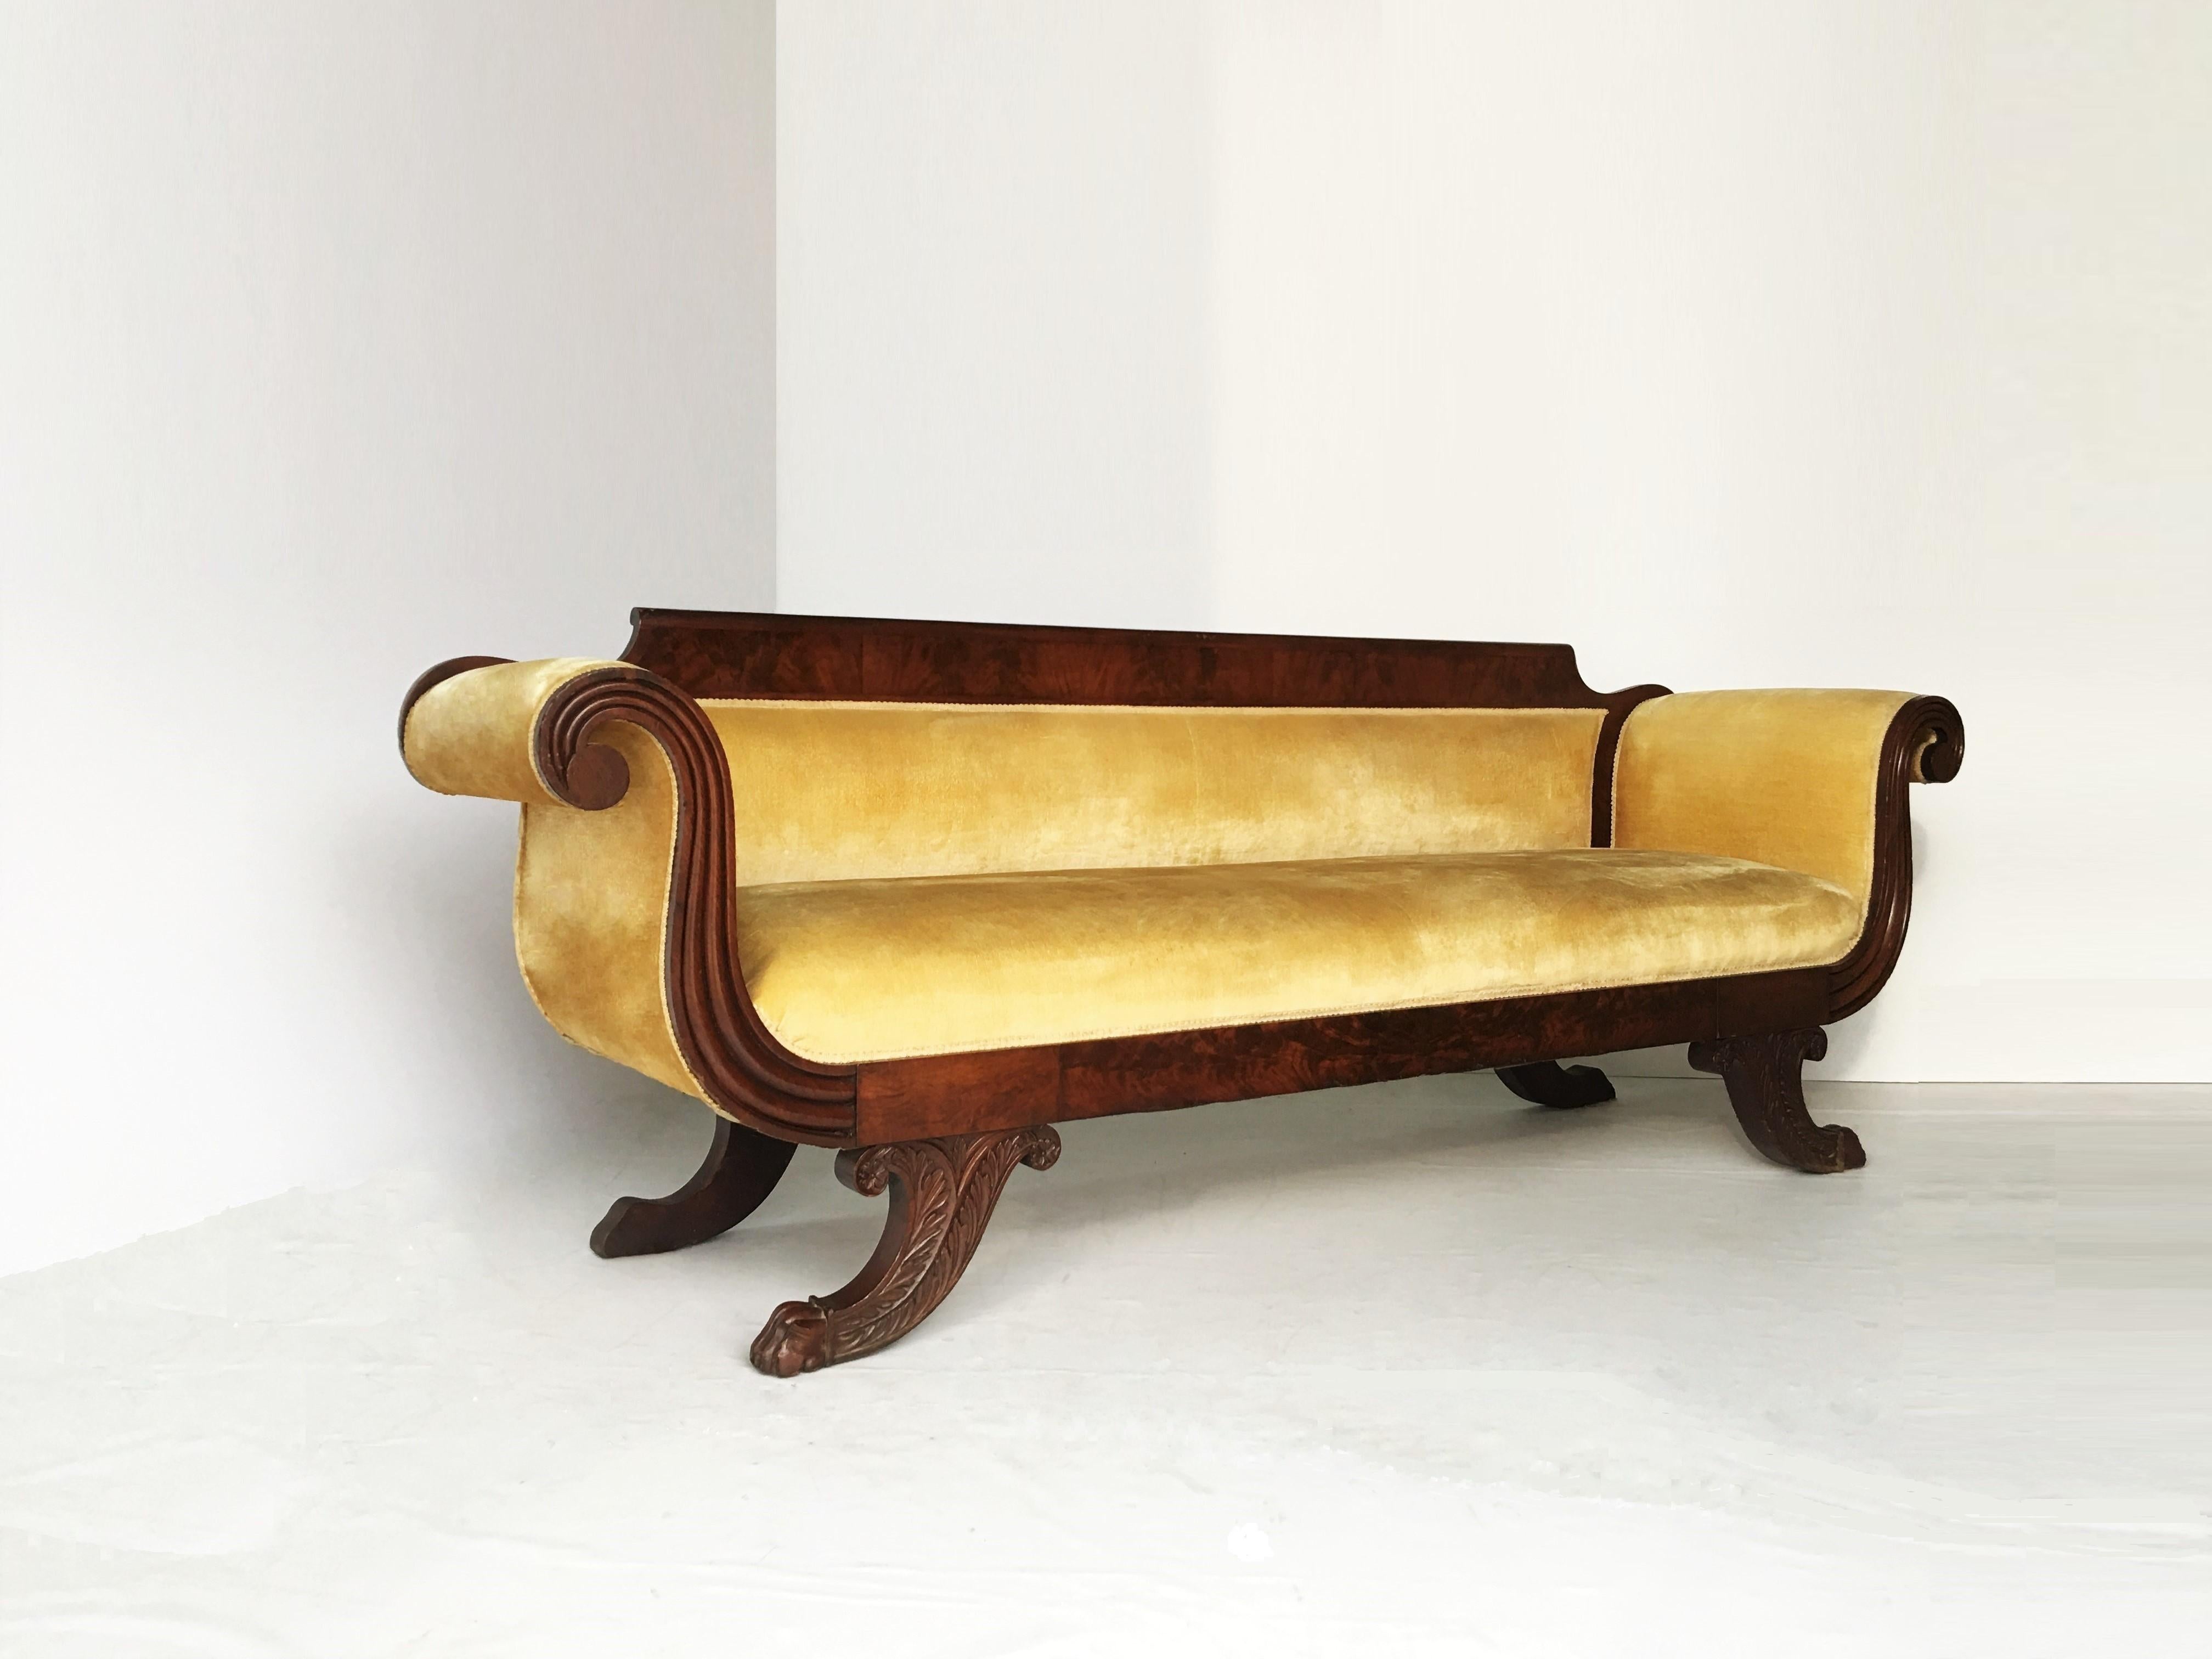 Classical upholstered in yellow velvet carved mahogany Grecian sofa, probably New York. With highly figured mahogany veneers on carved crest rail and front seat rail terminating at each arm scrolled. Floral carved saber shaped legs ending in paw